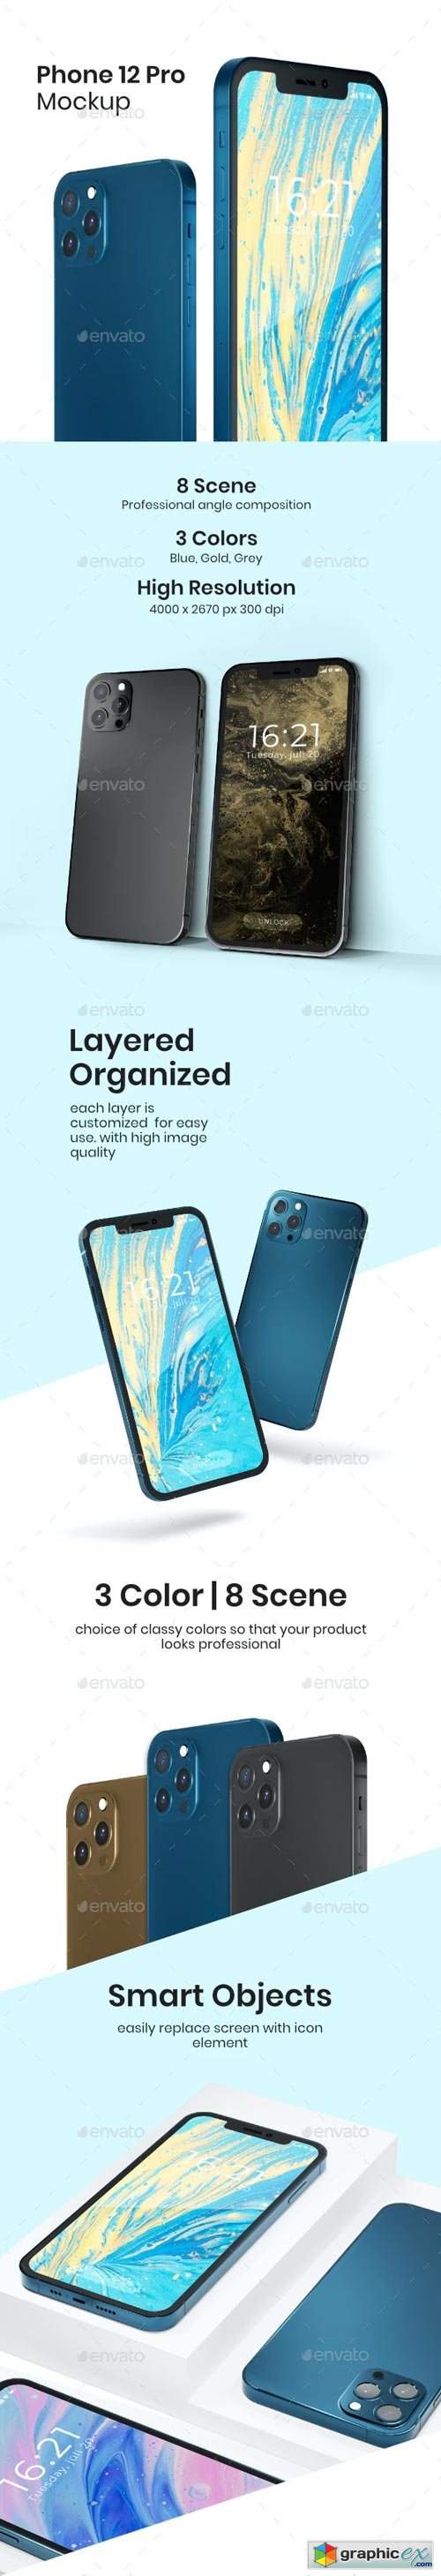 Smartphone 12 Pro Mock-ups PSD in 3 Colors 